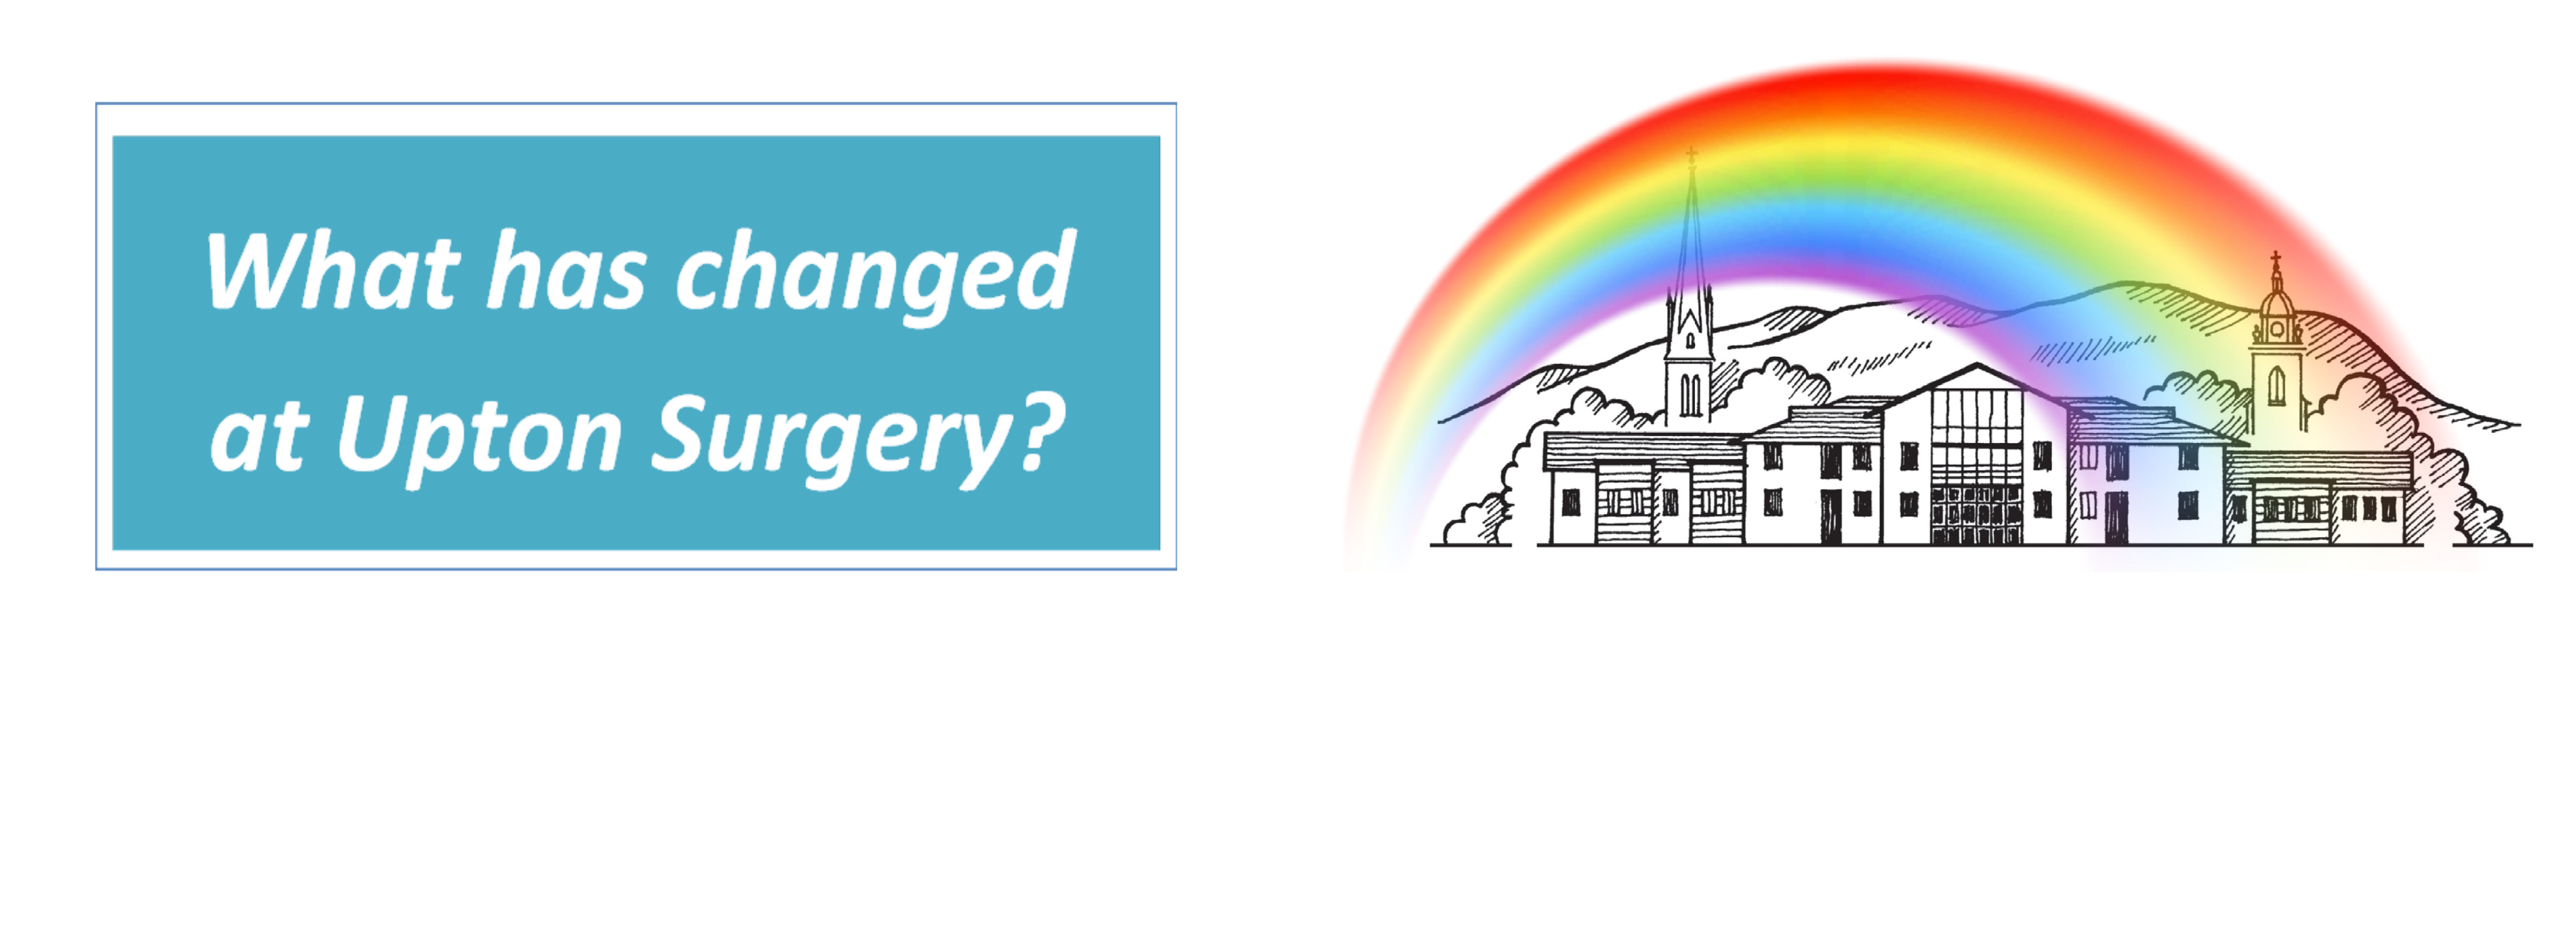 What has changed at Upton Surgery?